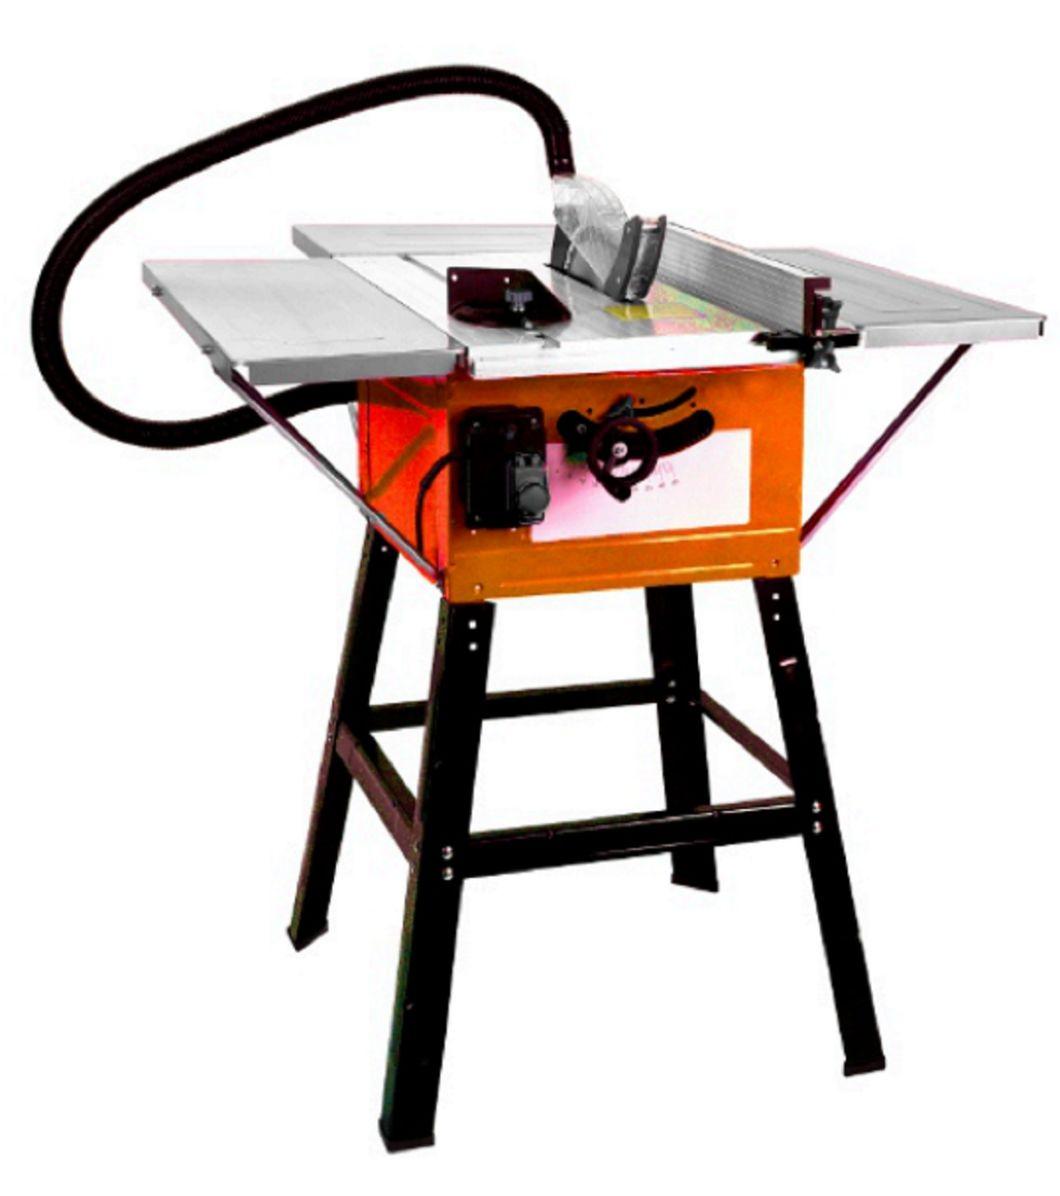 1600W Powerful Electric Table Saw -Planer